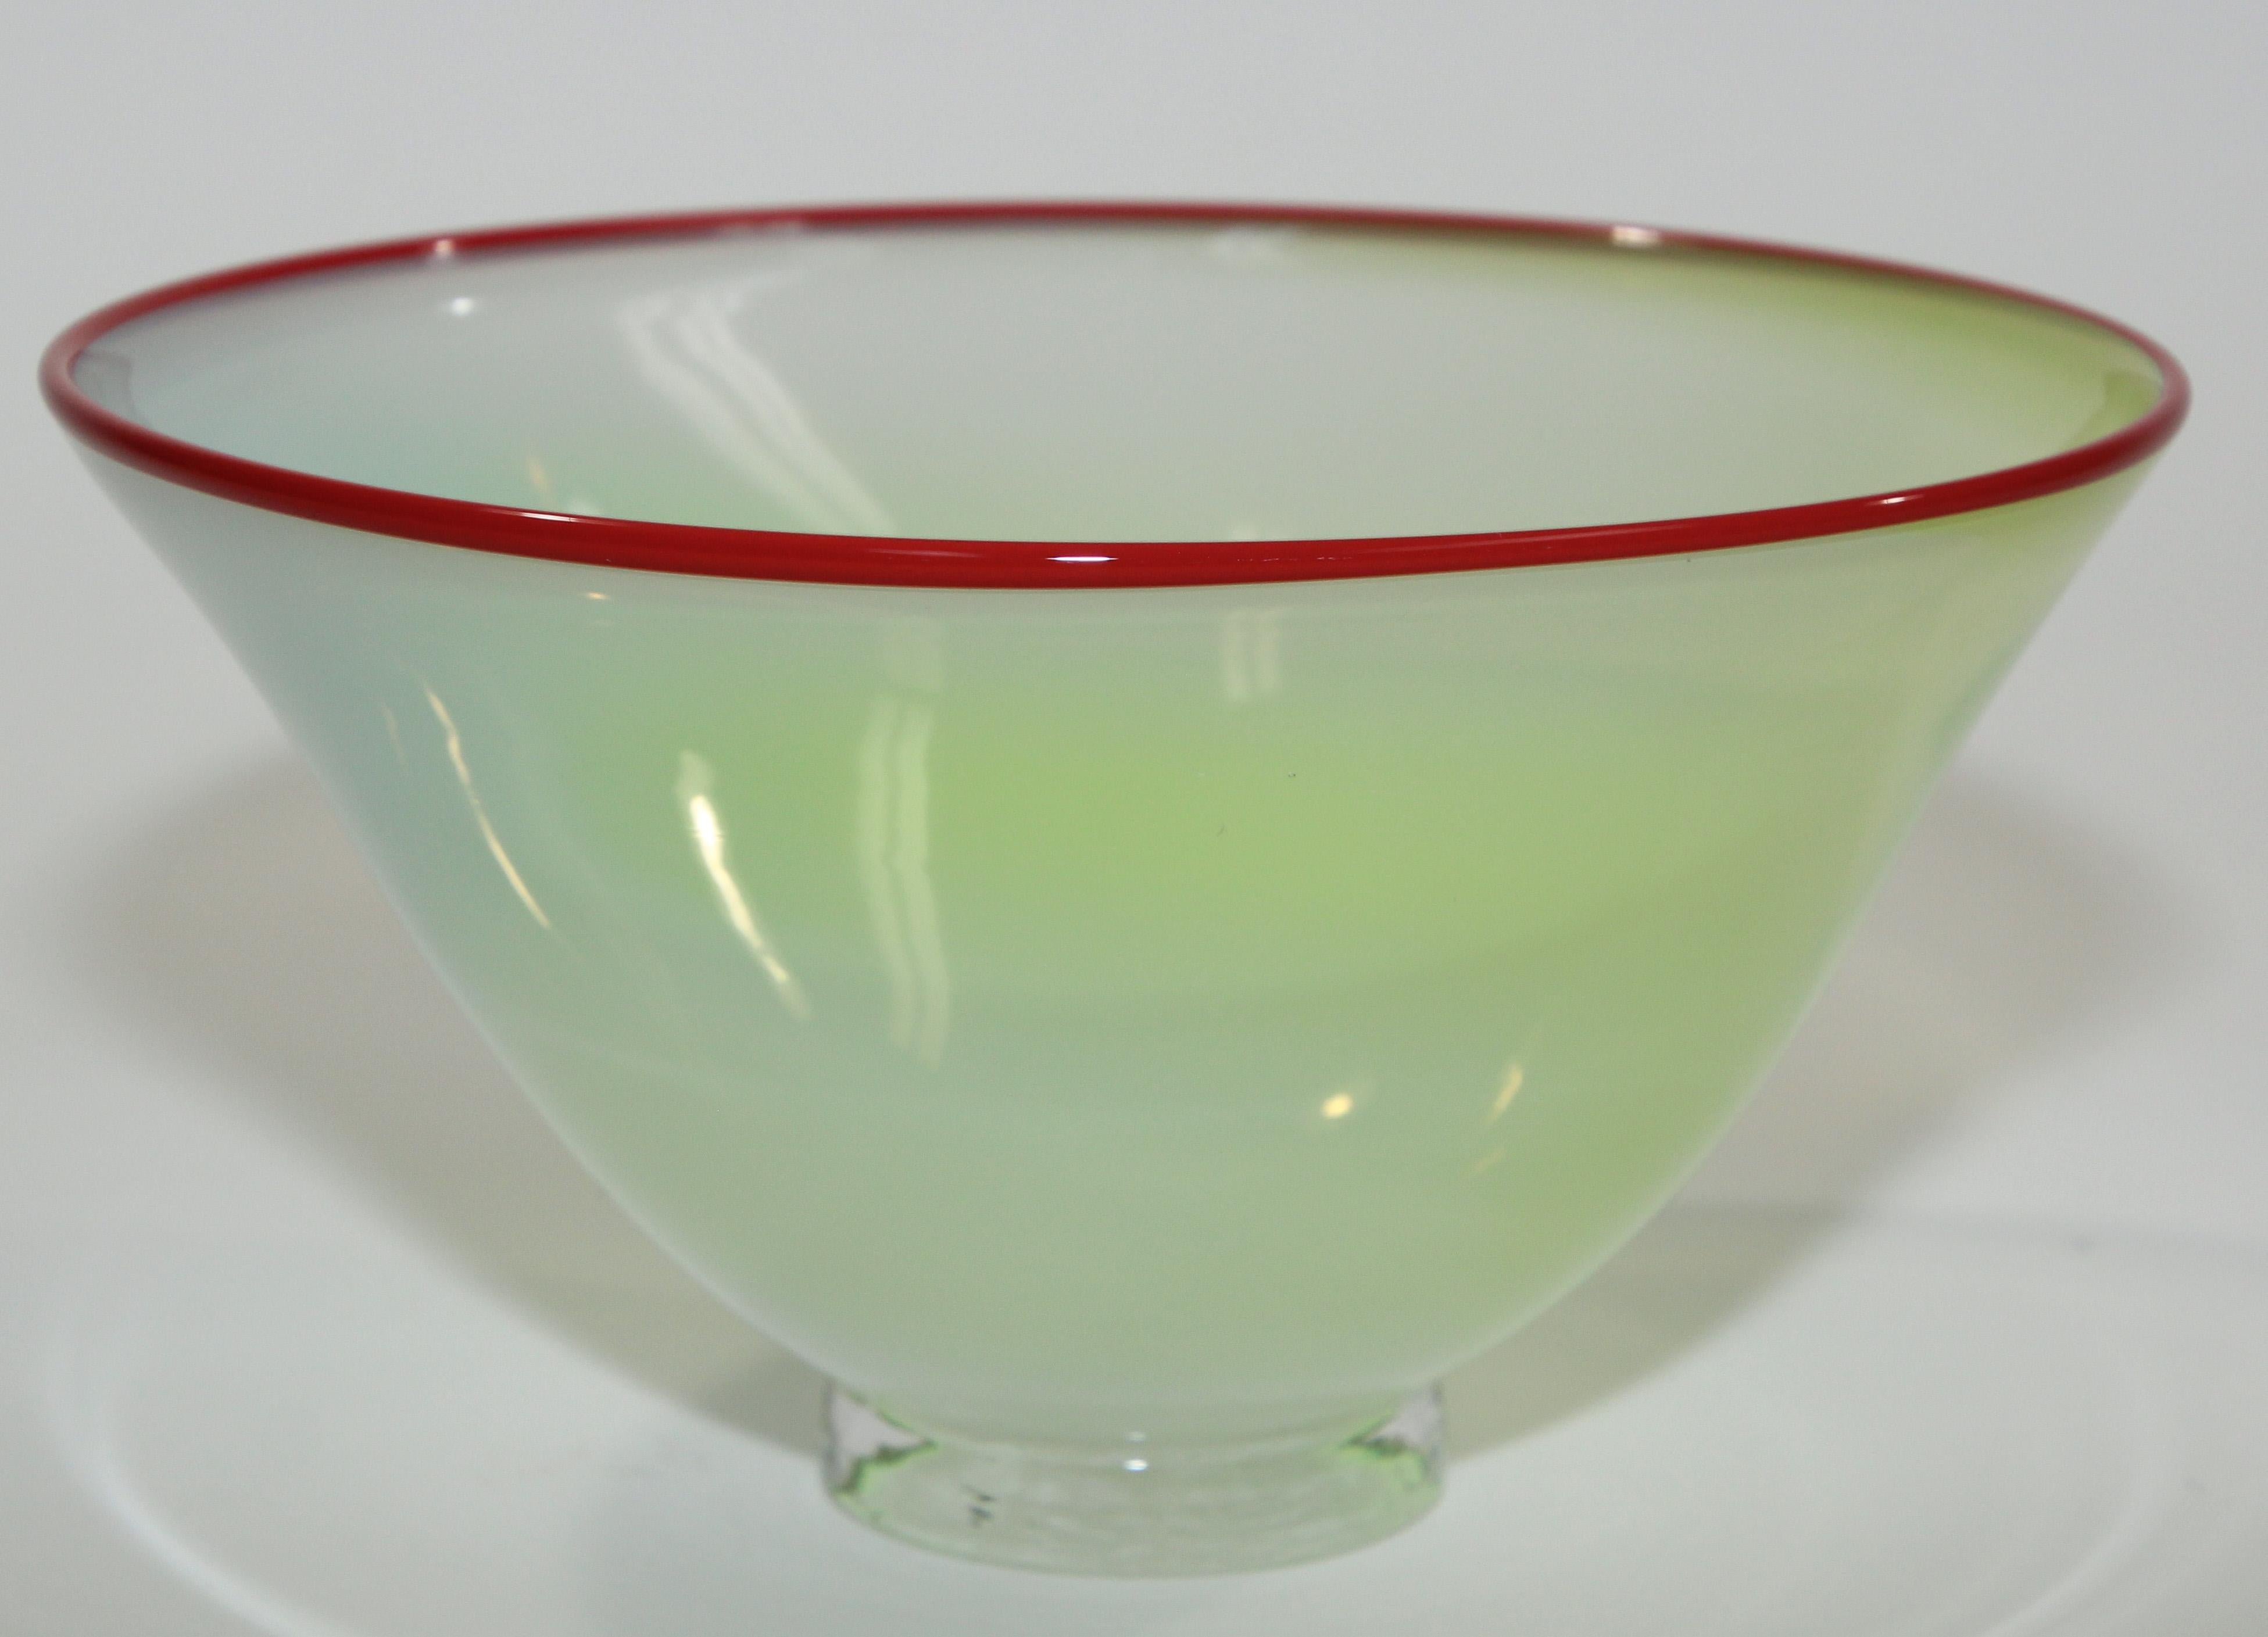 Beautiful mid-20th century Italian murano Venetian hand blown art glass footed bowl
Fabulous bowl in jade color with red rim.
Beautiful decorative piece for any table or shelf, very delicate decorative bowl with bright modern colors.
Hand blown